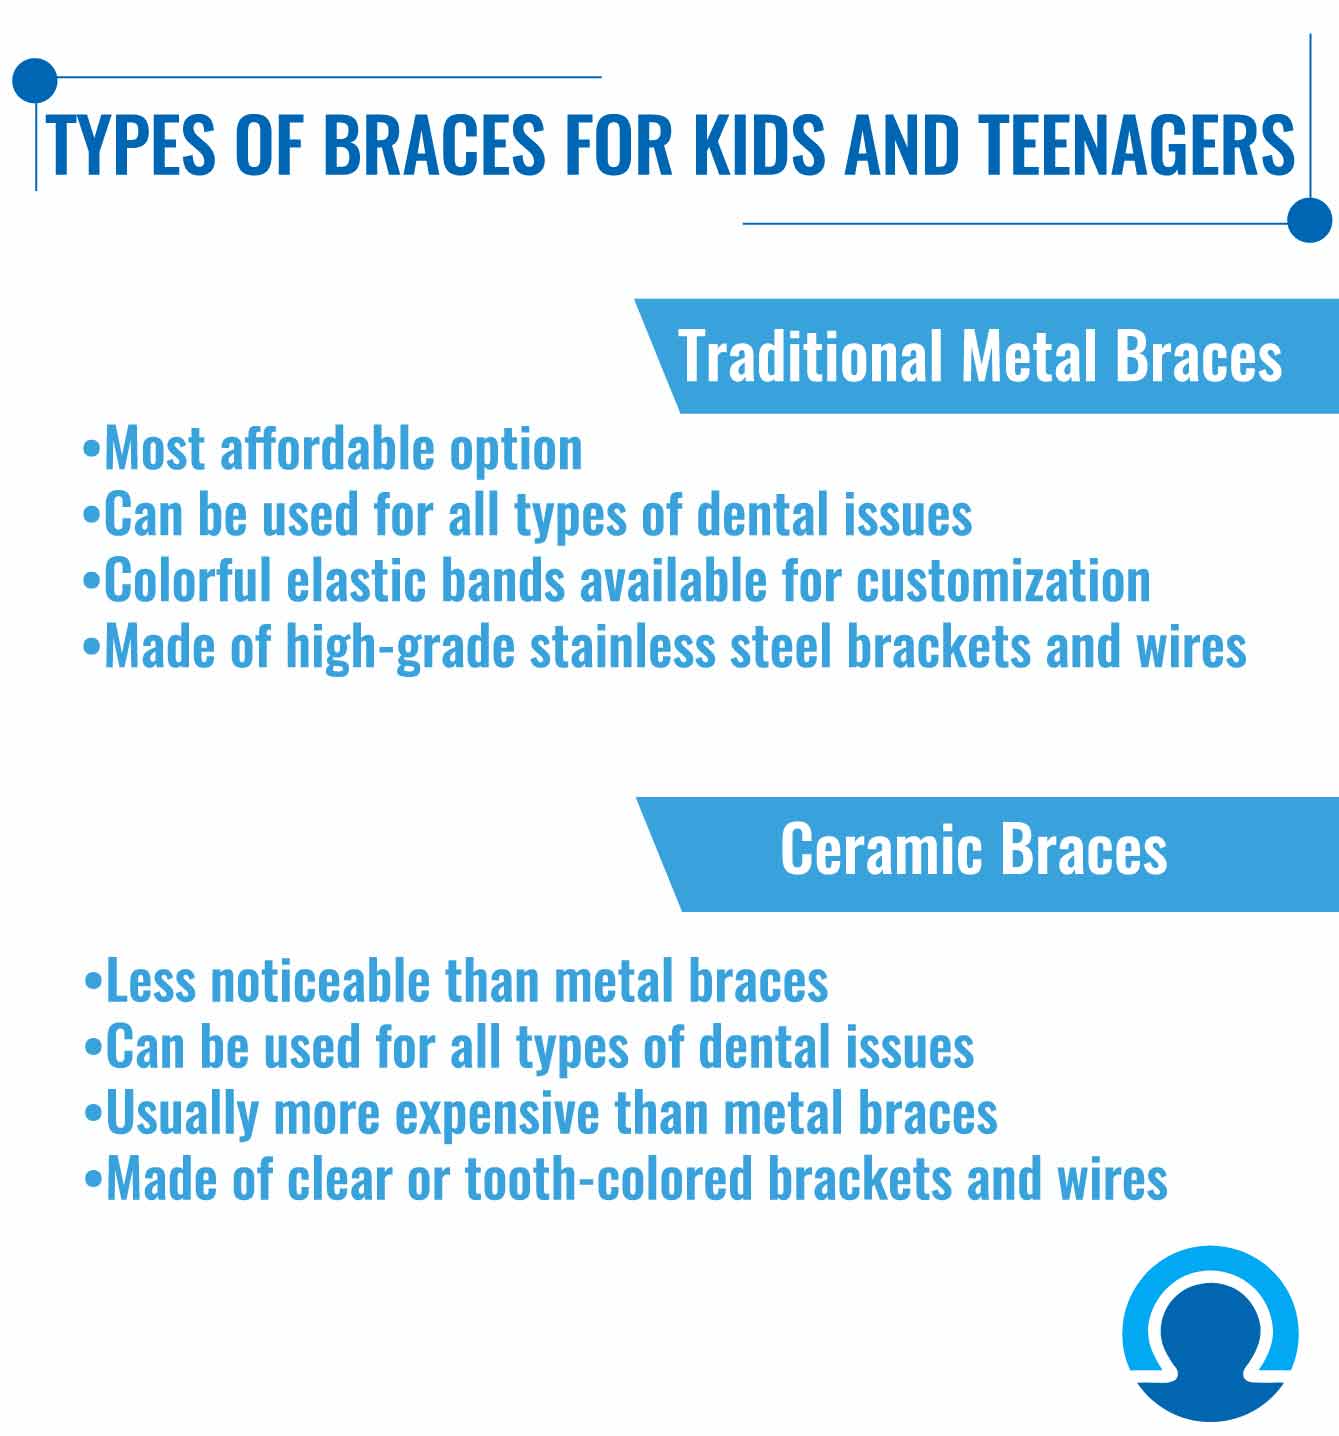 Types of Kids and Teenagers Braces